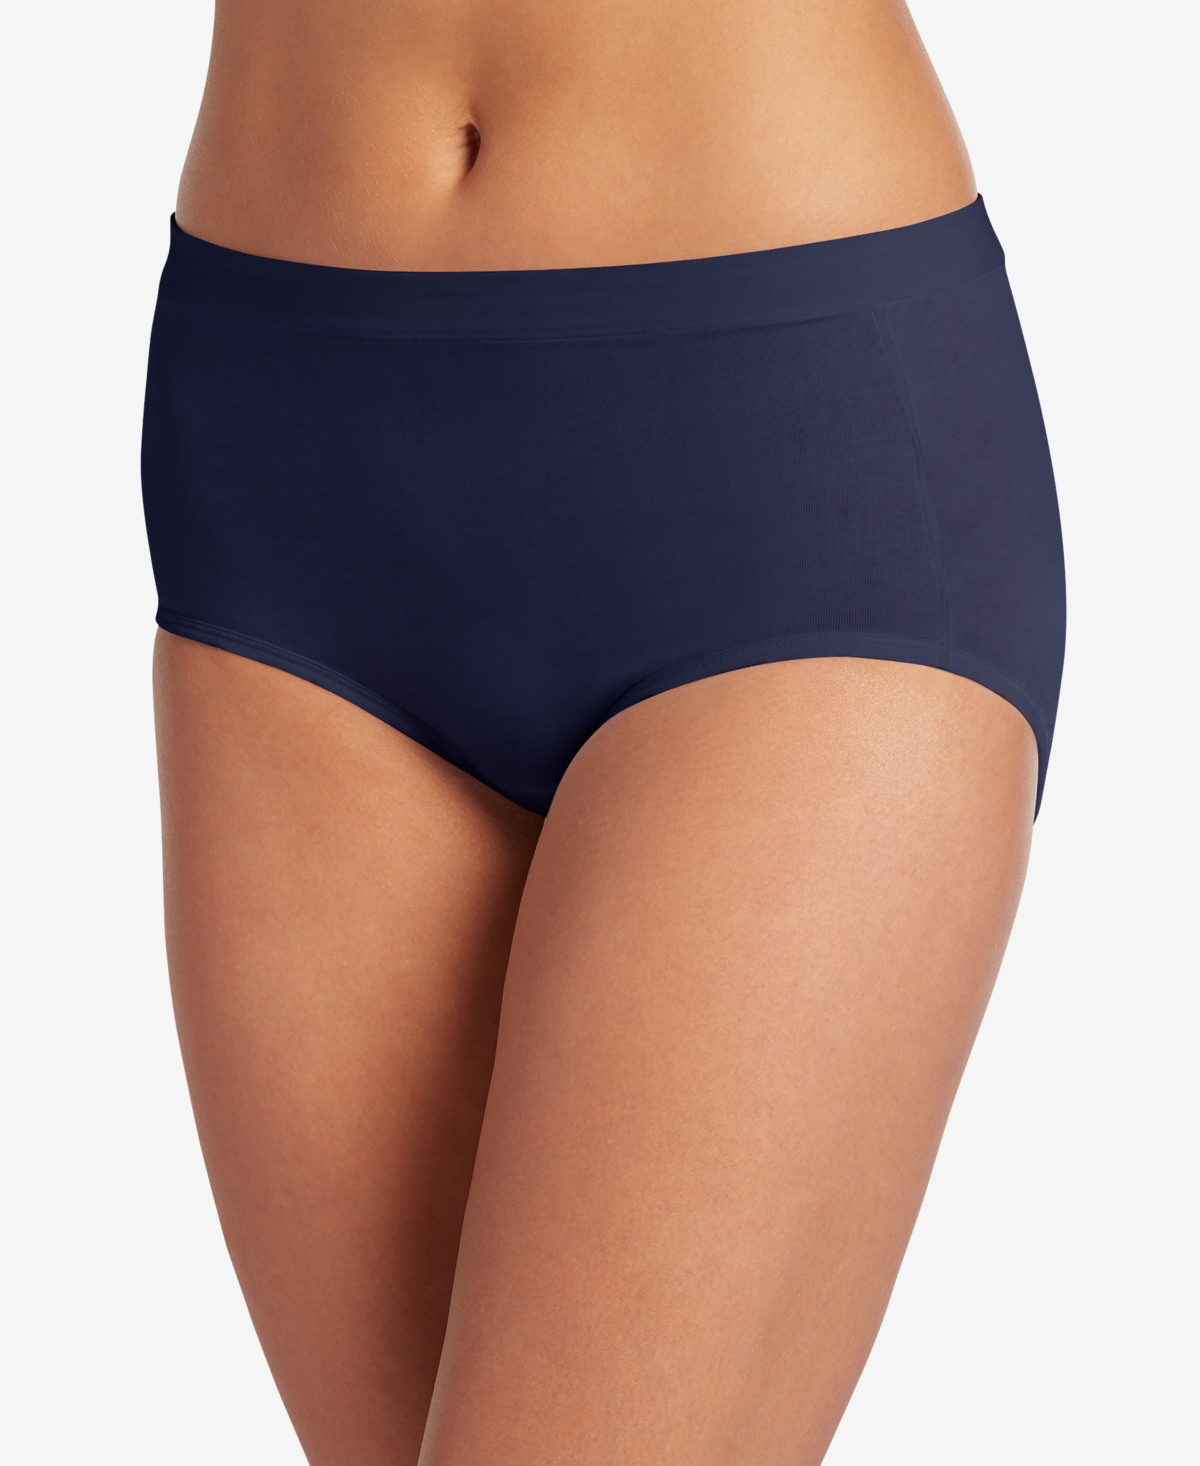 Cotton Stretch Brief 1556, available in extended sizes - Light Grey Heather